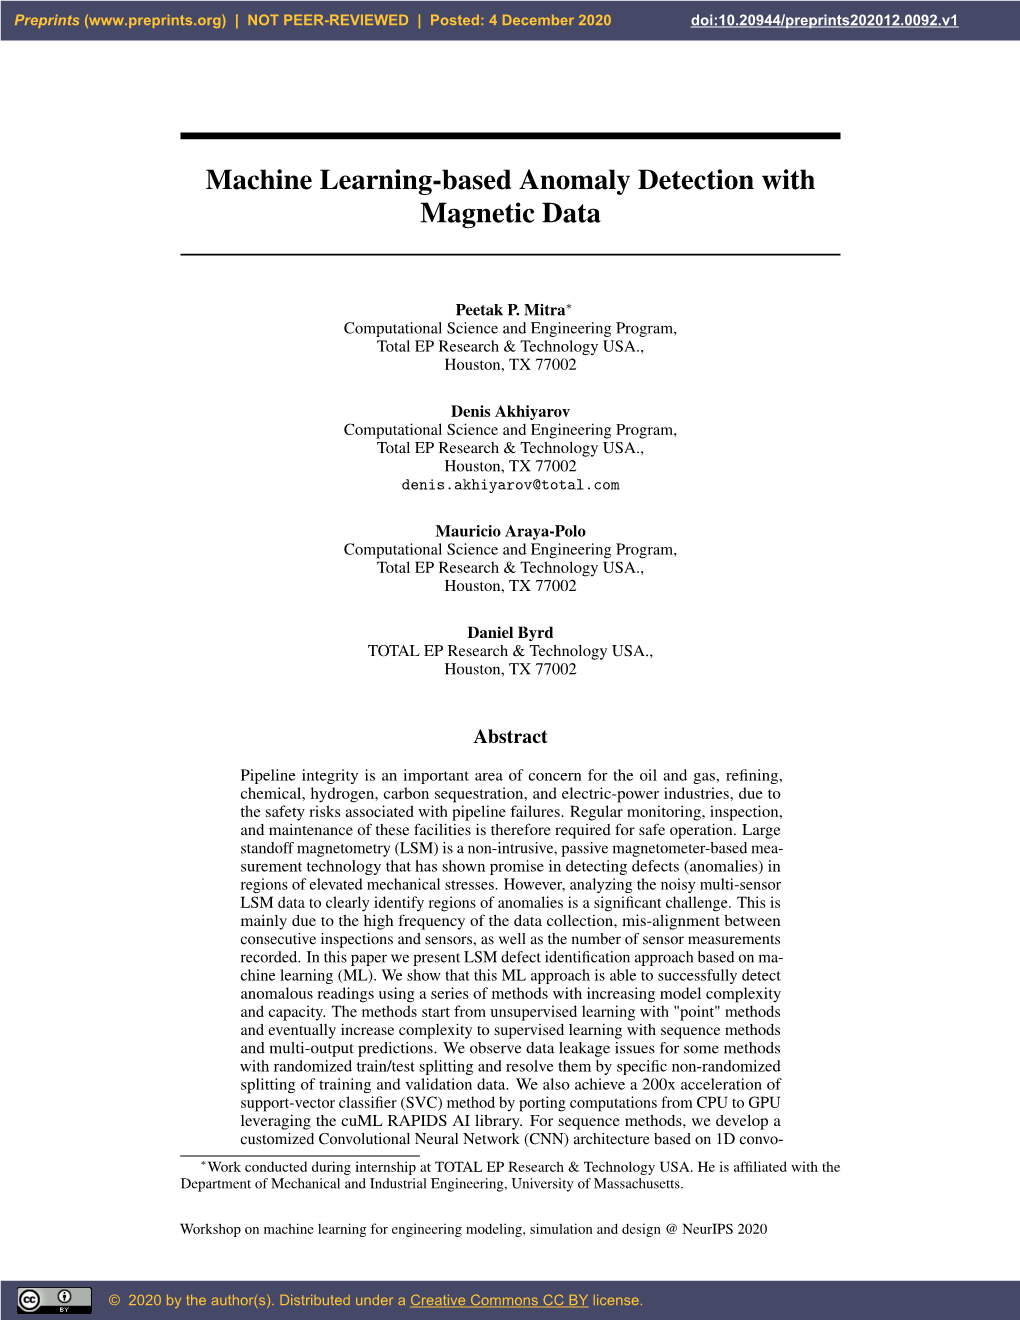 Machine Learning-Based Anomaly Detection with Magnetic Data